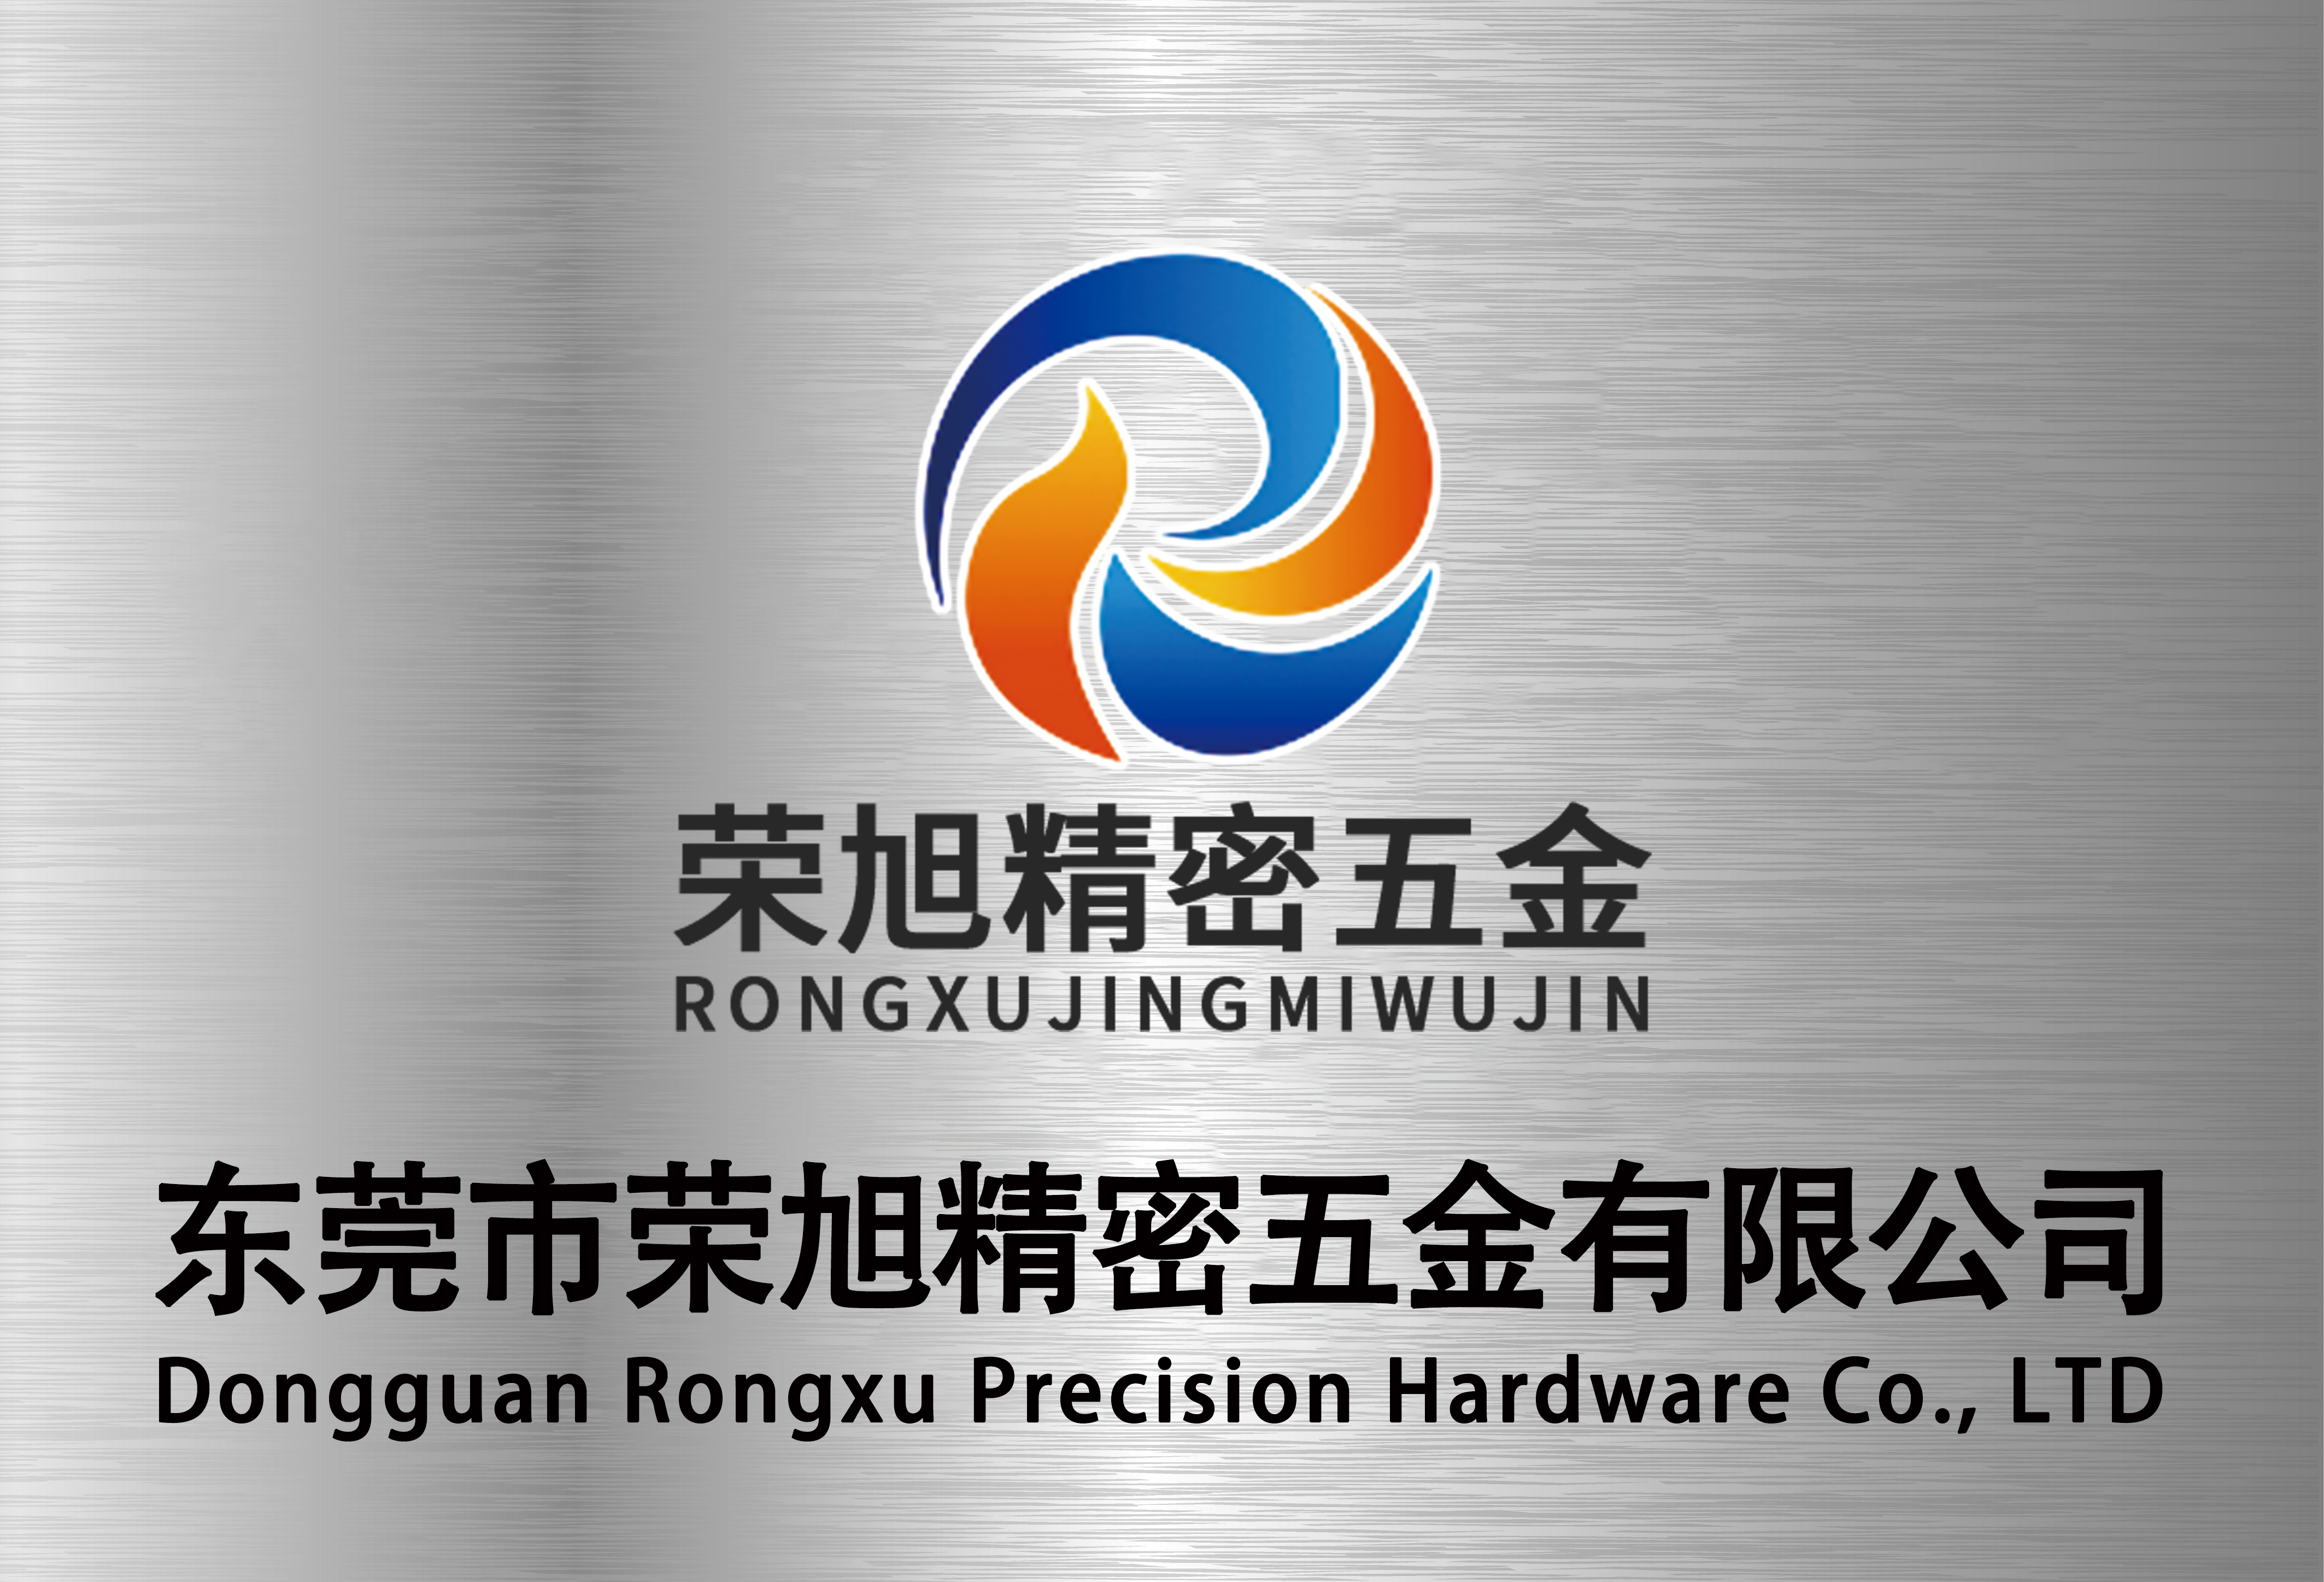 First acquaintance with Rongxu Precision Hardware——glad to meet you